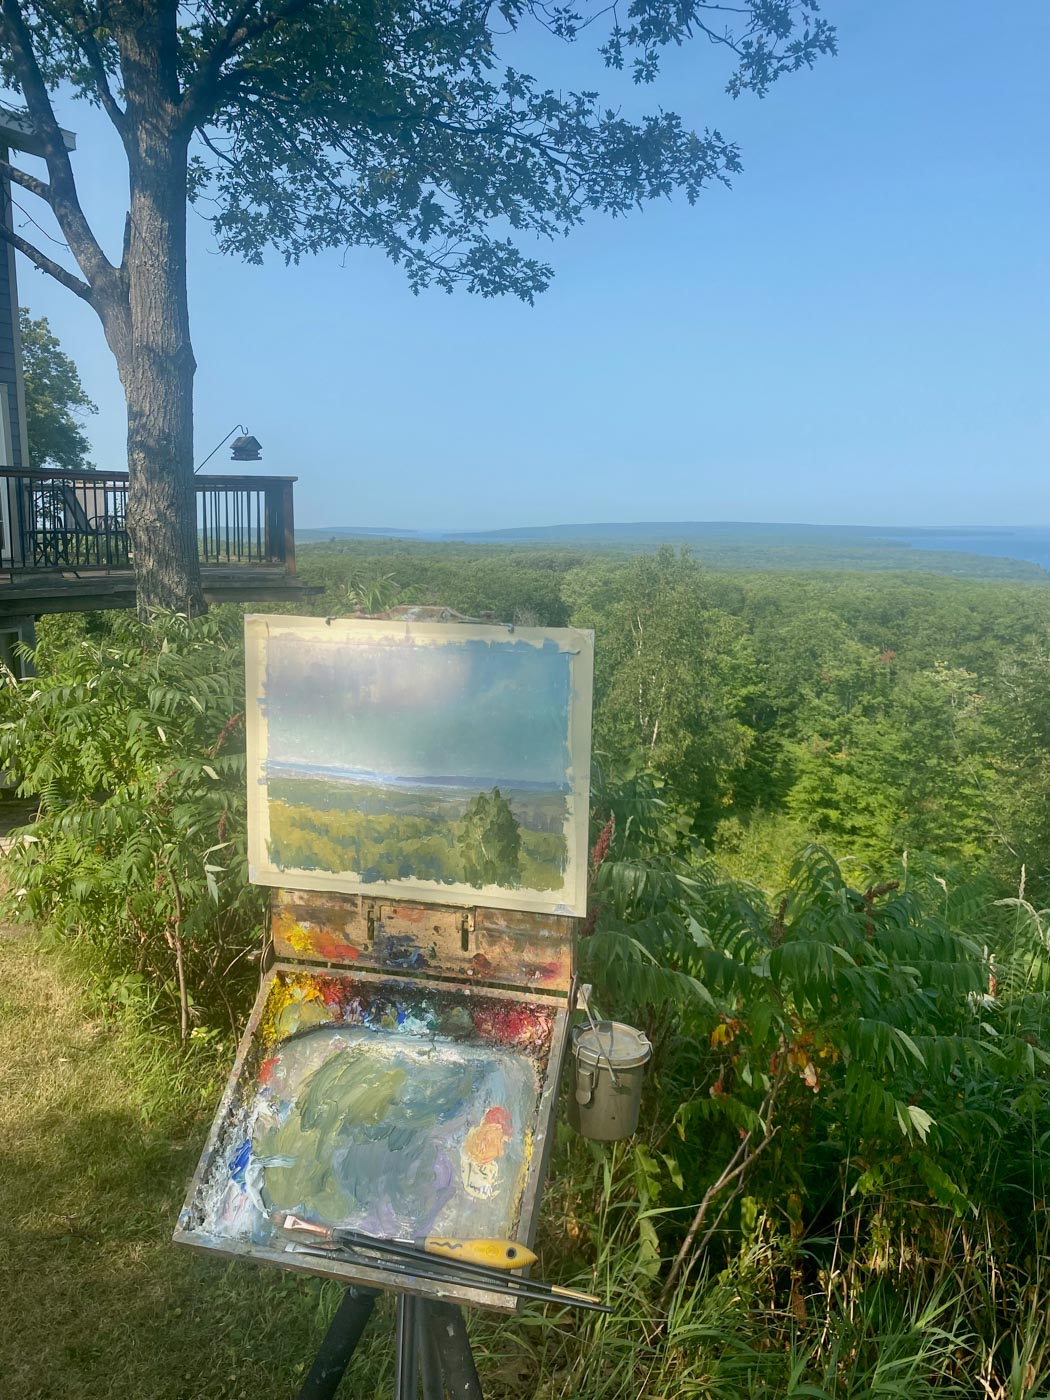 View of a painting and some painting materials outdoors